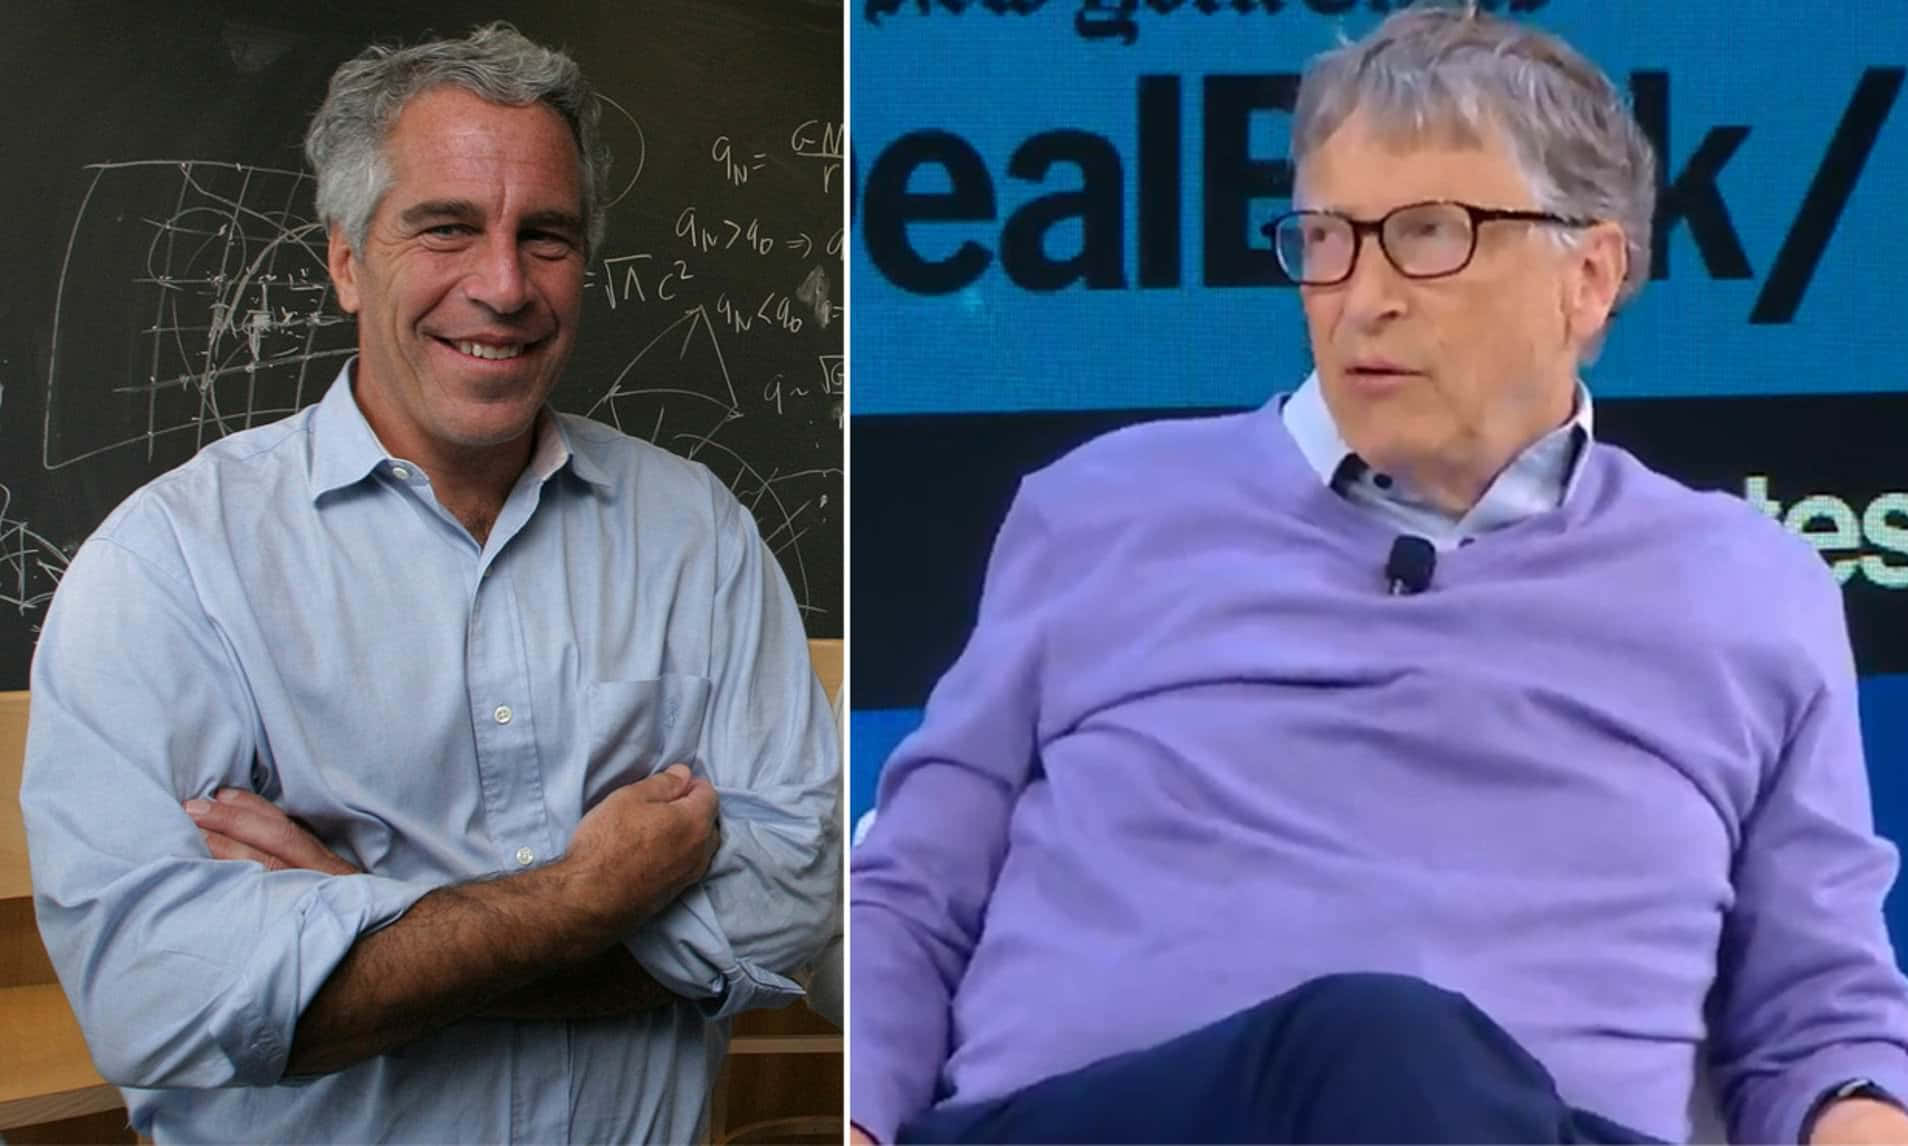 Bill Gates and Jeffrey Epstein posing together.